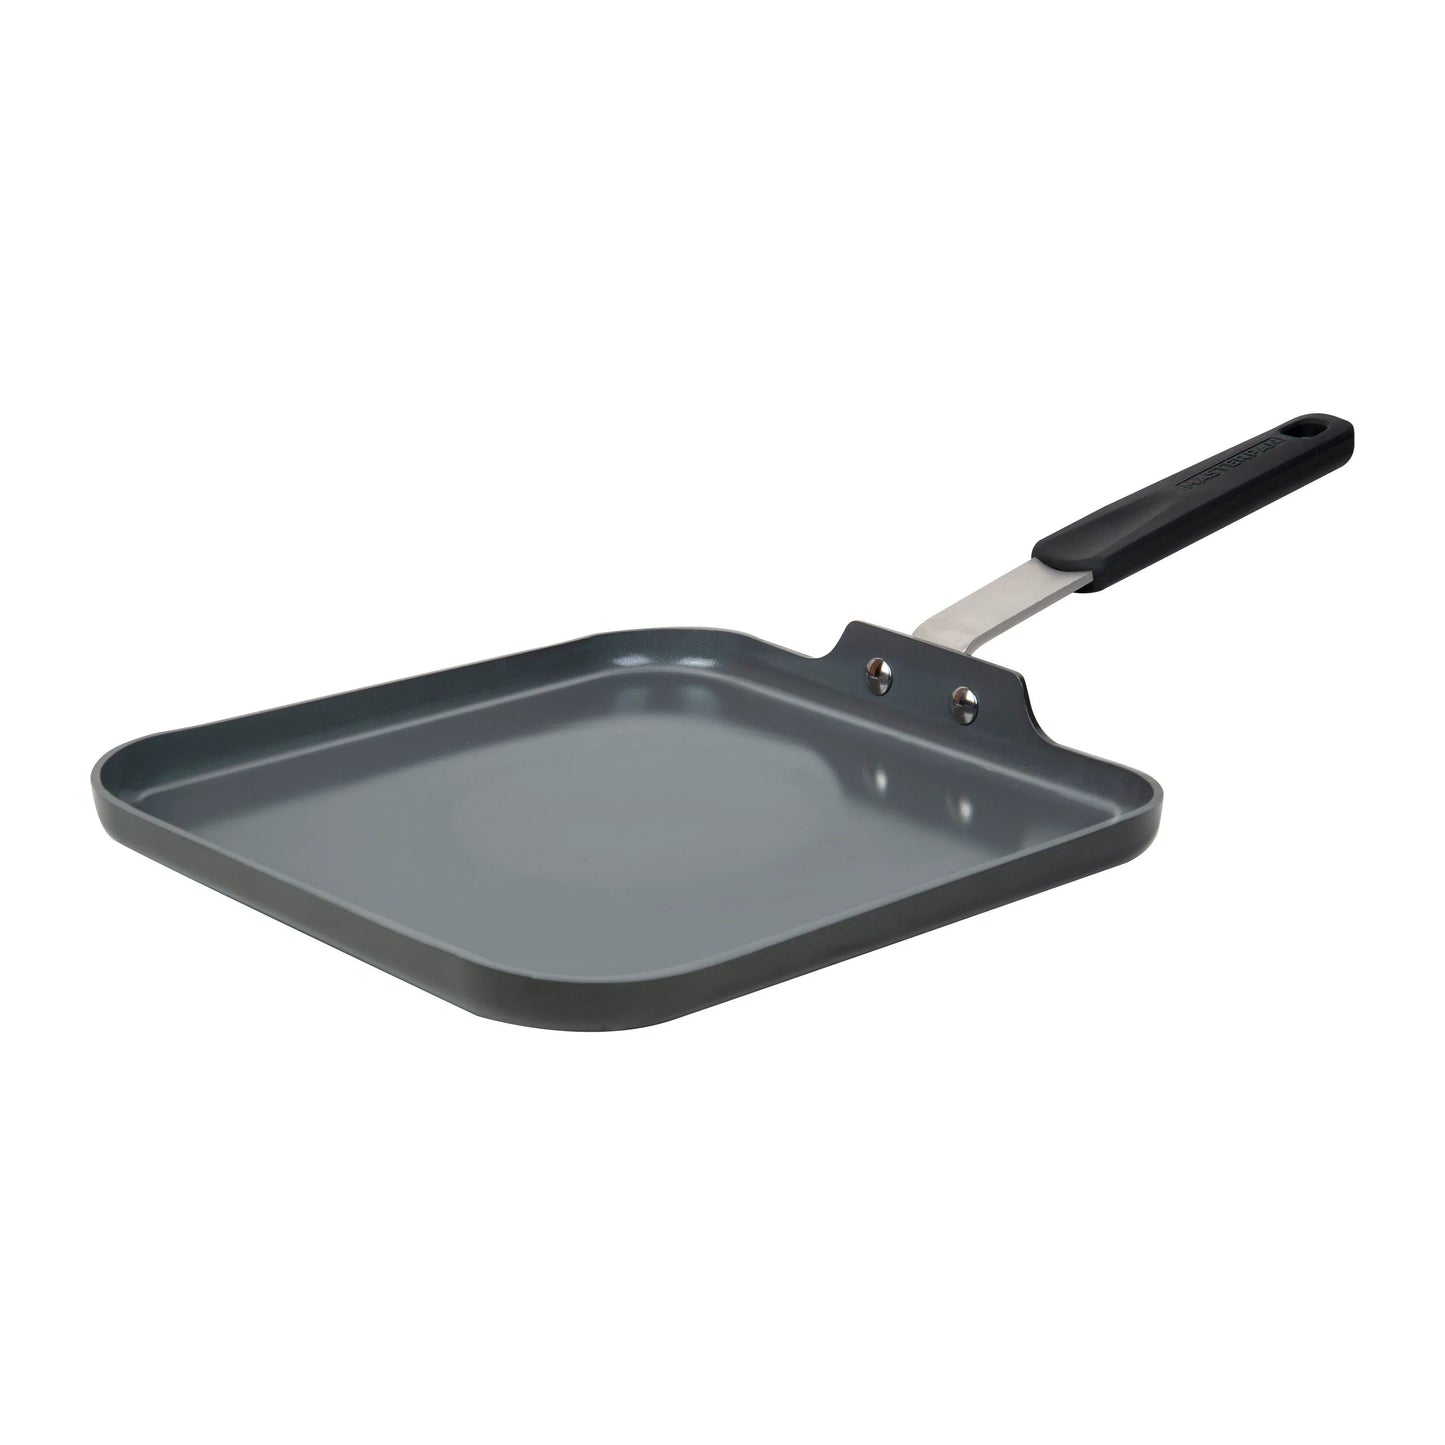 MASTERPAN Chef's Series 11” Griddle Pan / Pancake Pan, Healthy Ceramic Non-stick Aluminum Cookware With Stainless Steel Chef’s Handle